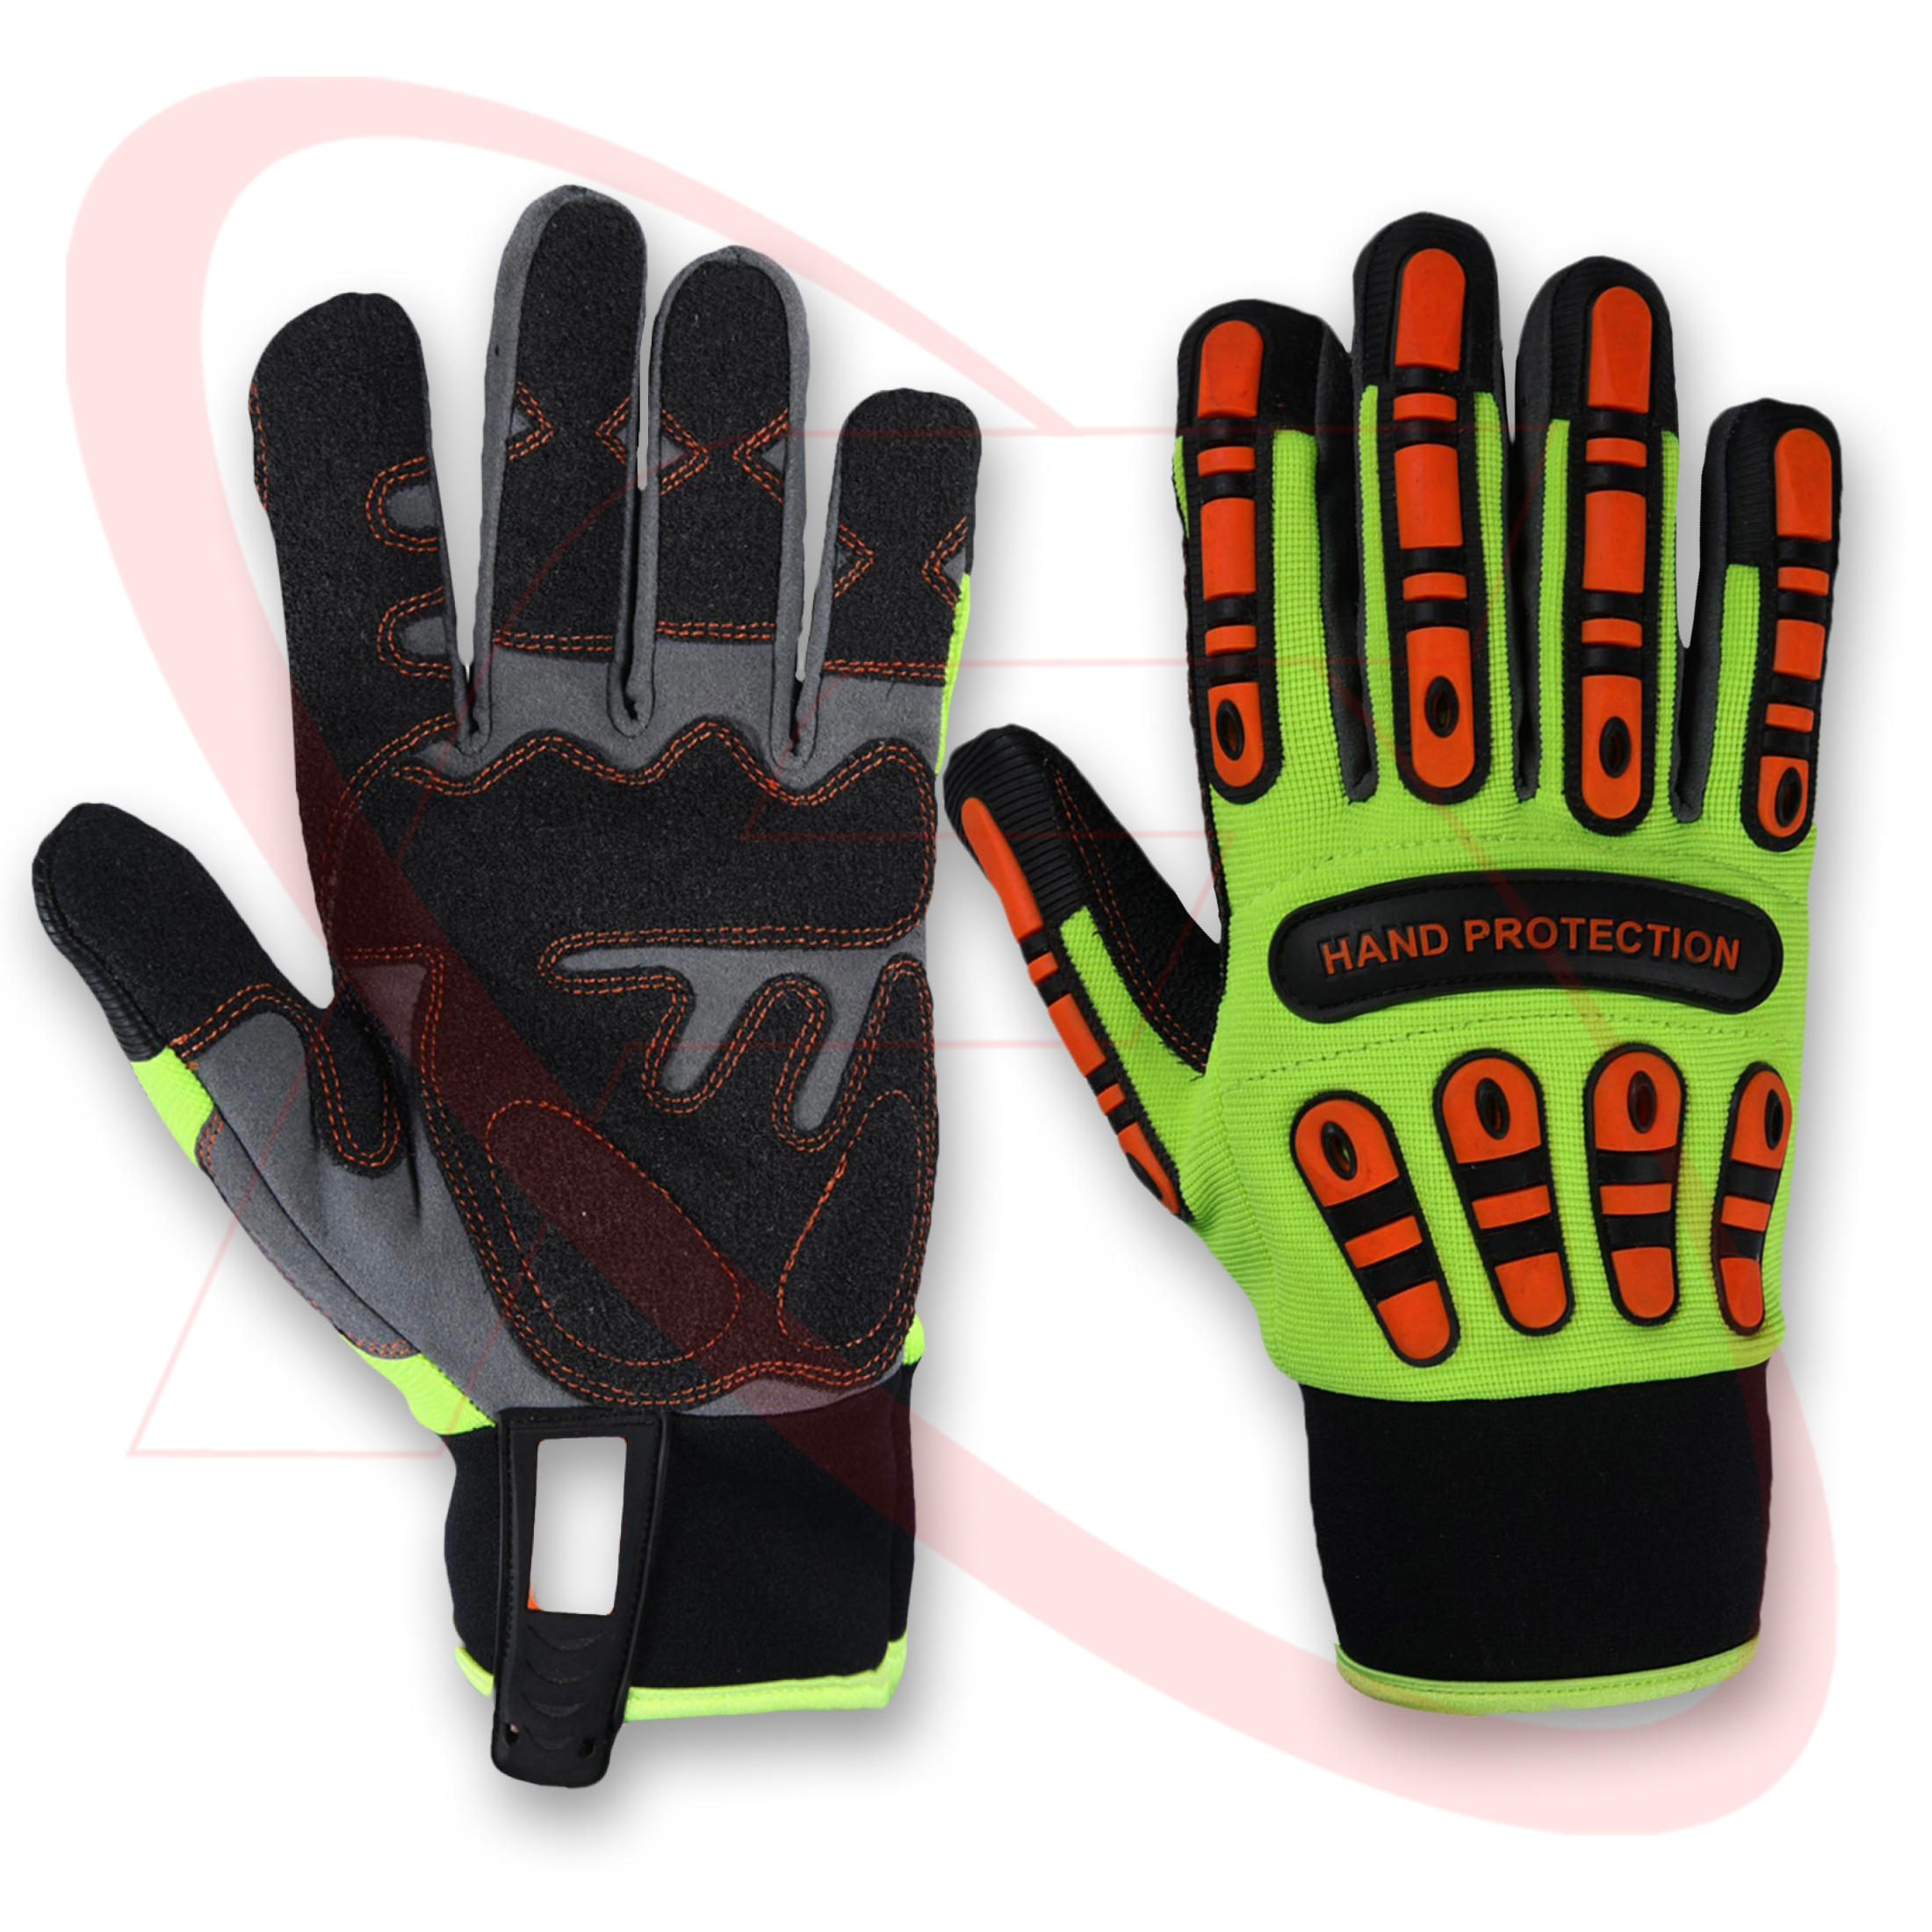 Cut 5 TPR Mechanic Gloves for Oil and Gas Industries Best Quality Impact Gloves Non-Slip Gloves